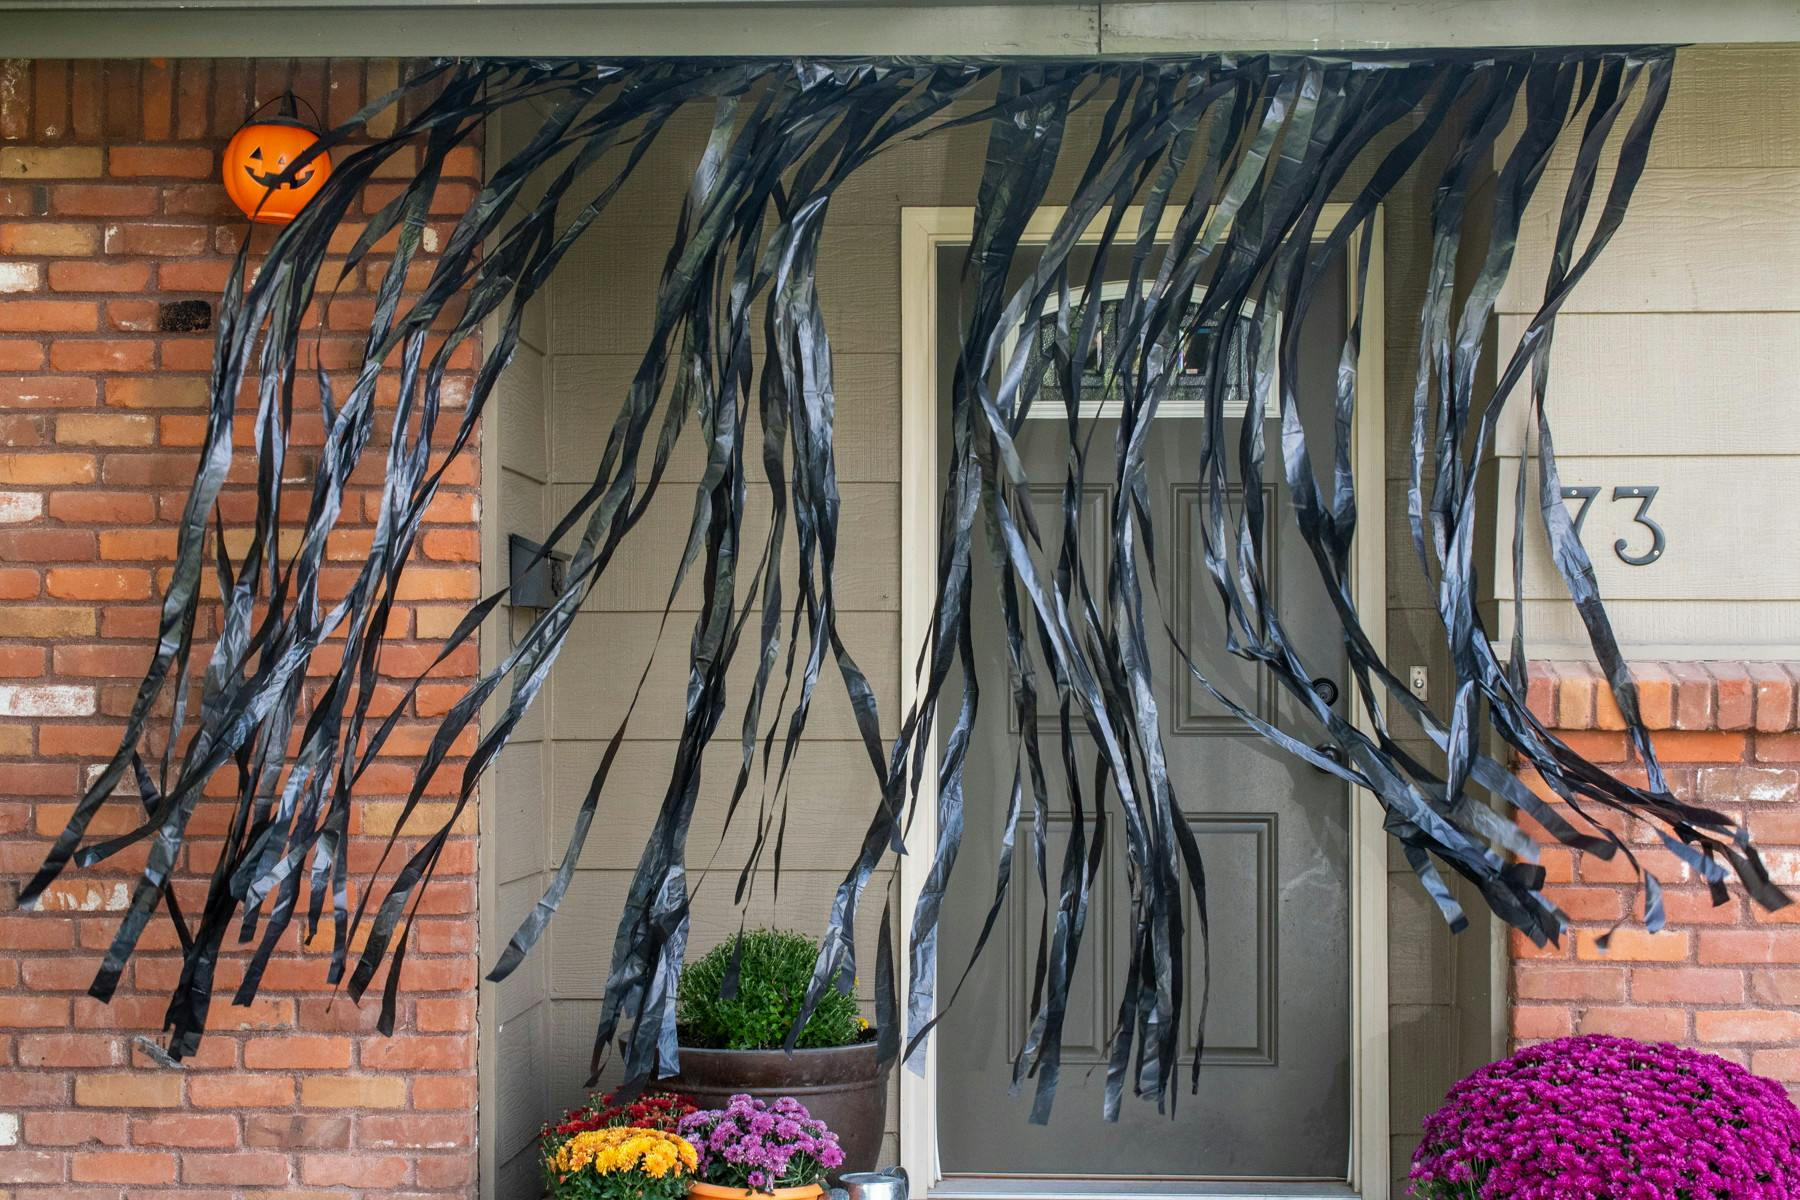 Black trash bags cut into strips hanging on the ceiling of a front porch for decoration.